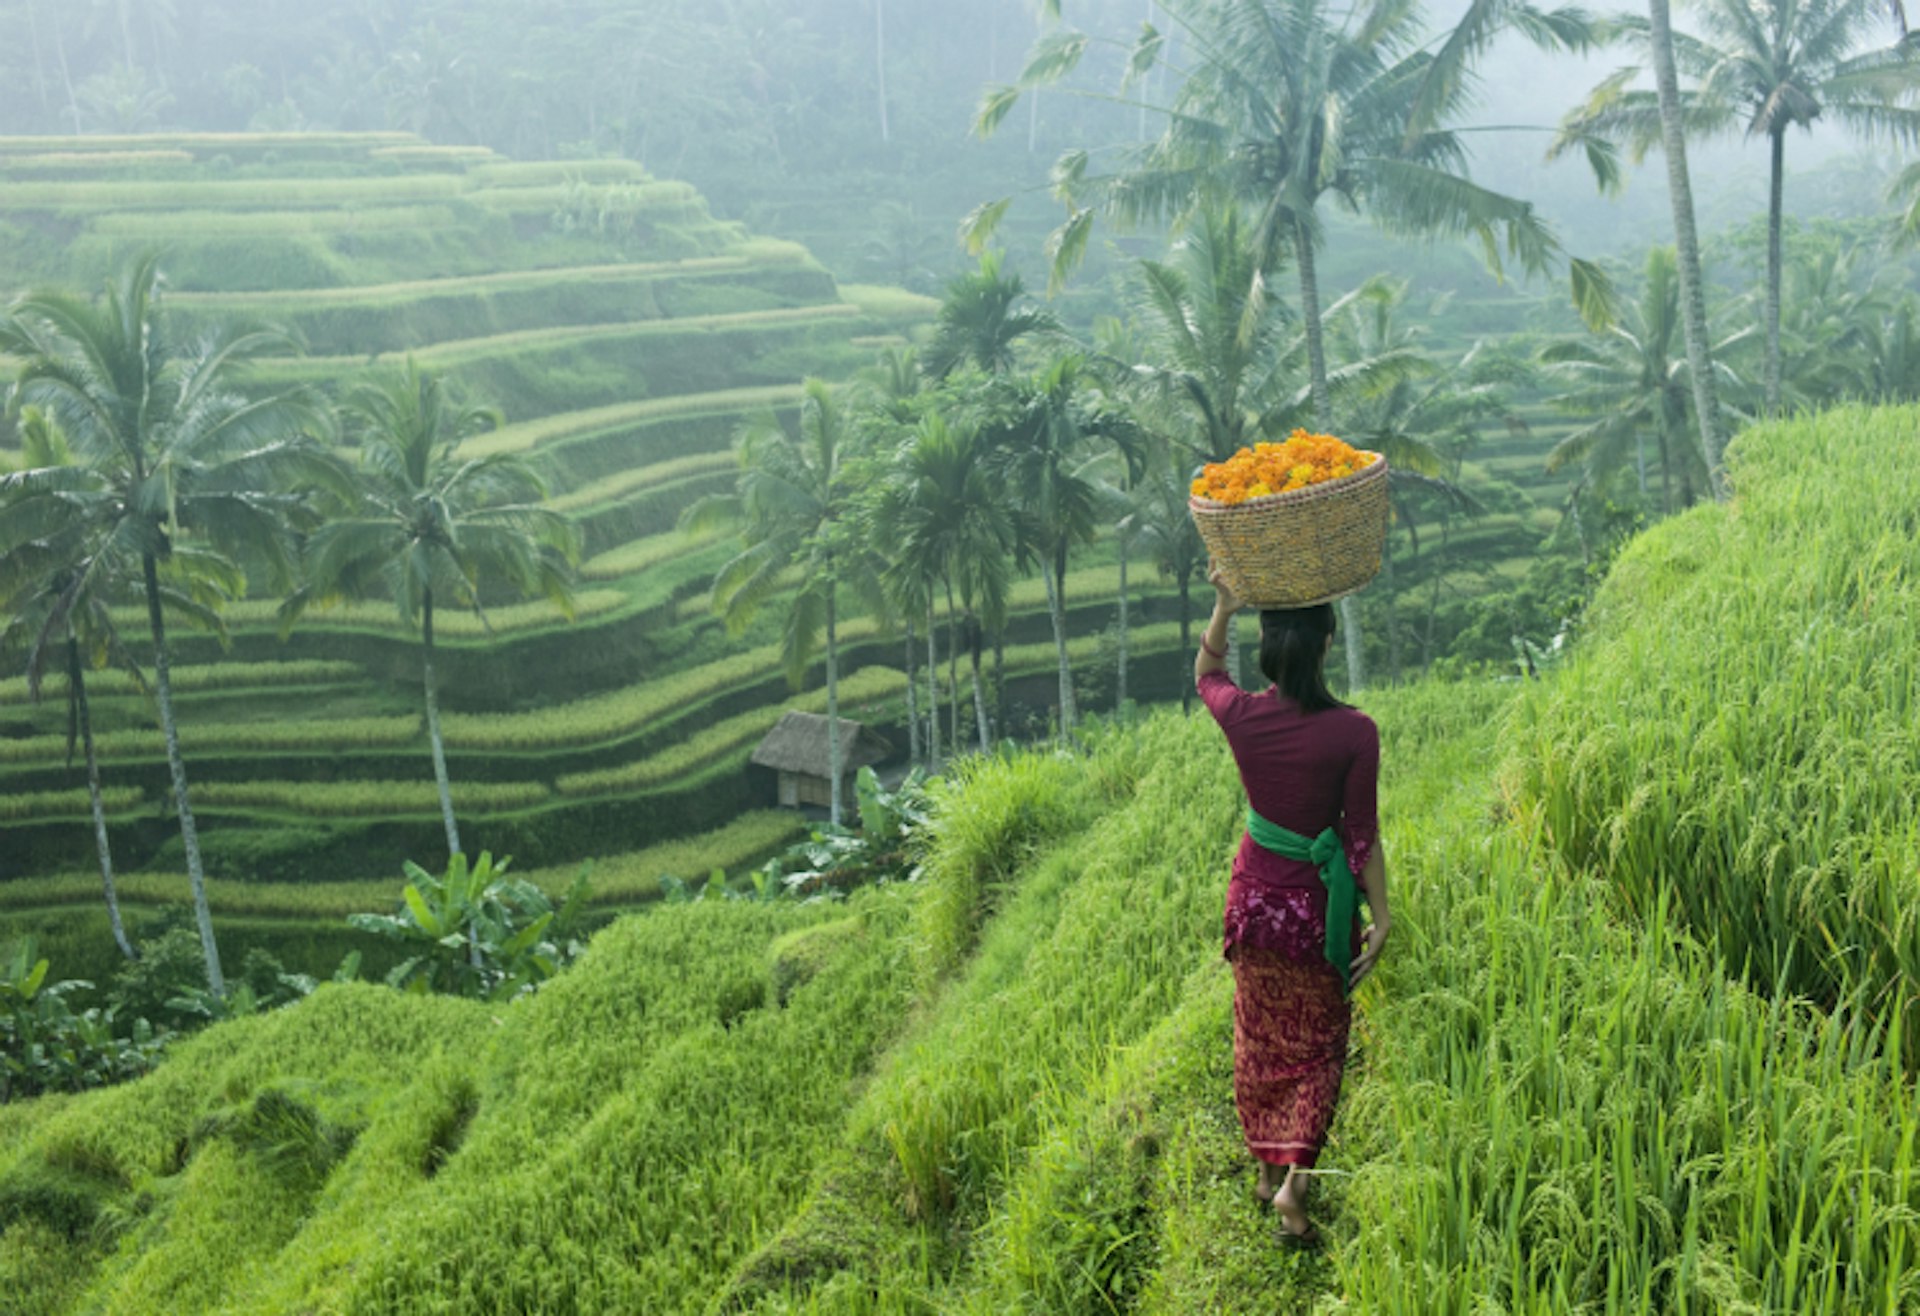 Ubud, Bali: so chilled out, you might never leave. Image by Martin Puddy / Stone / Getty Images